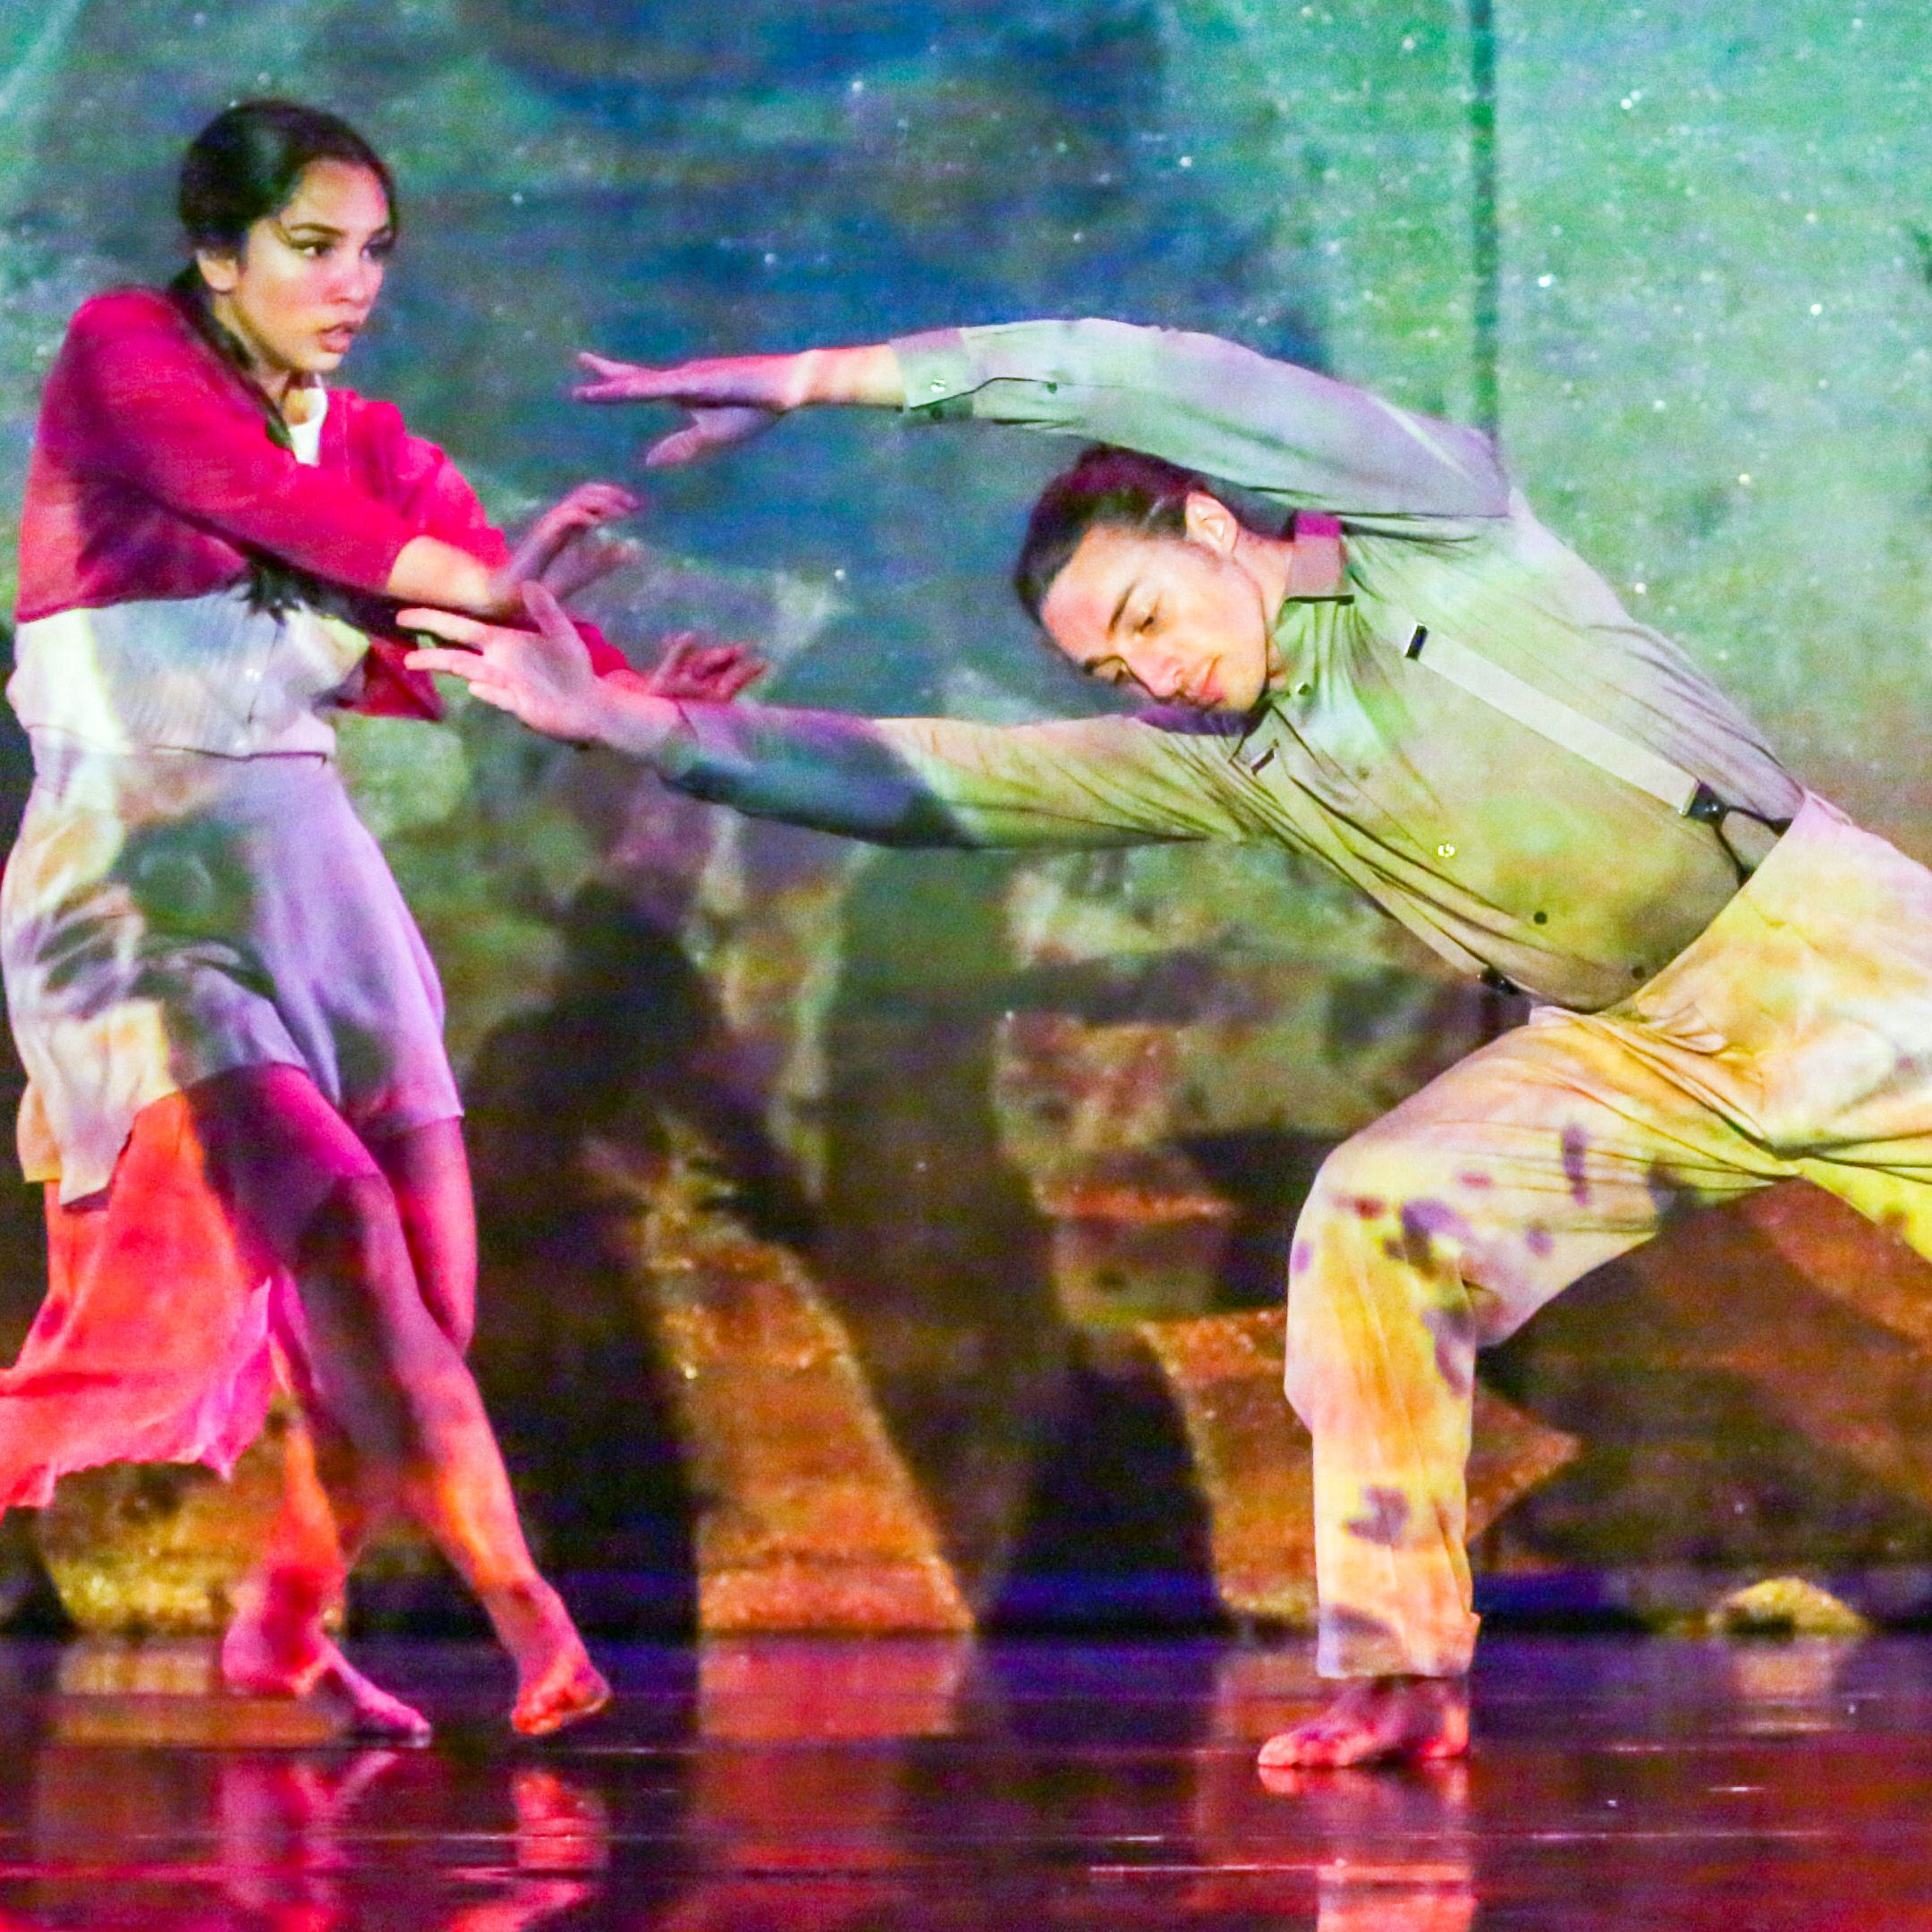 Dancers performing in Living in the Tempest